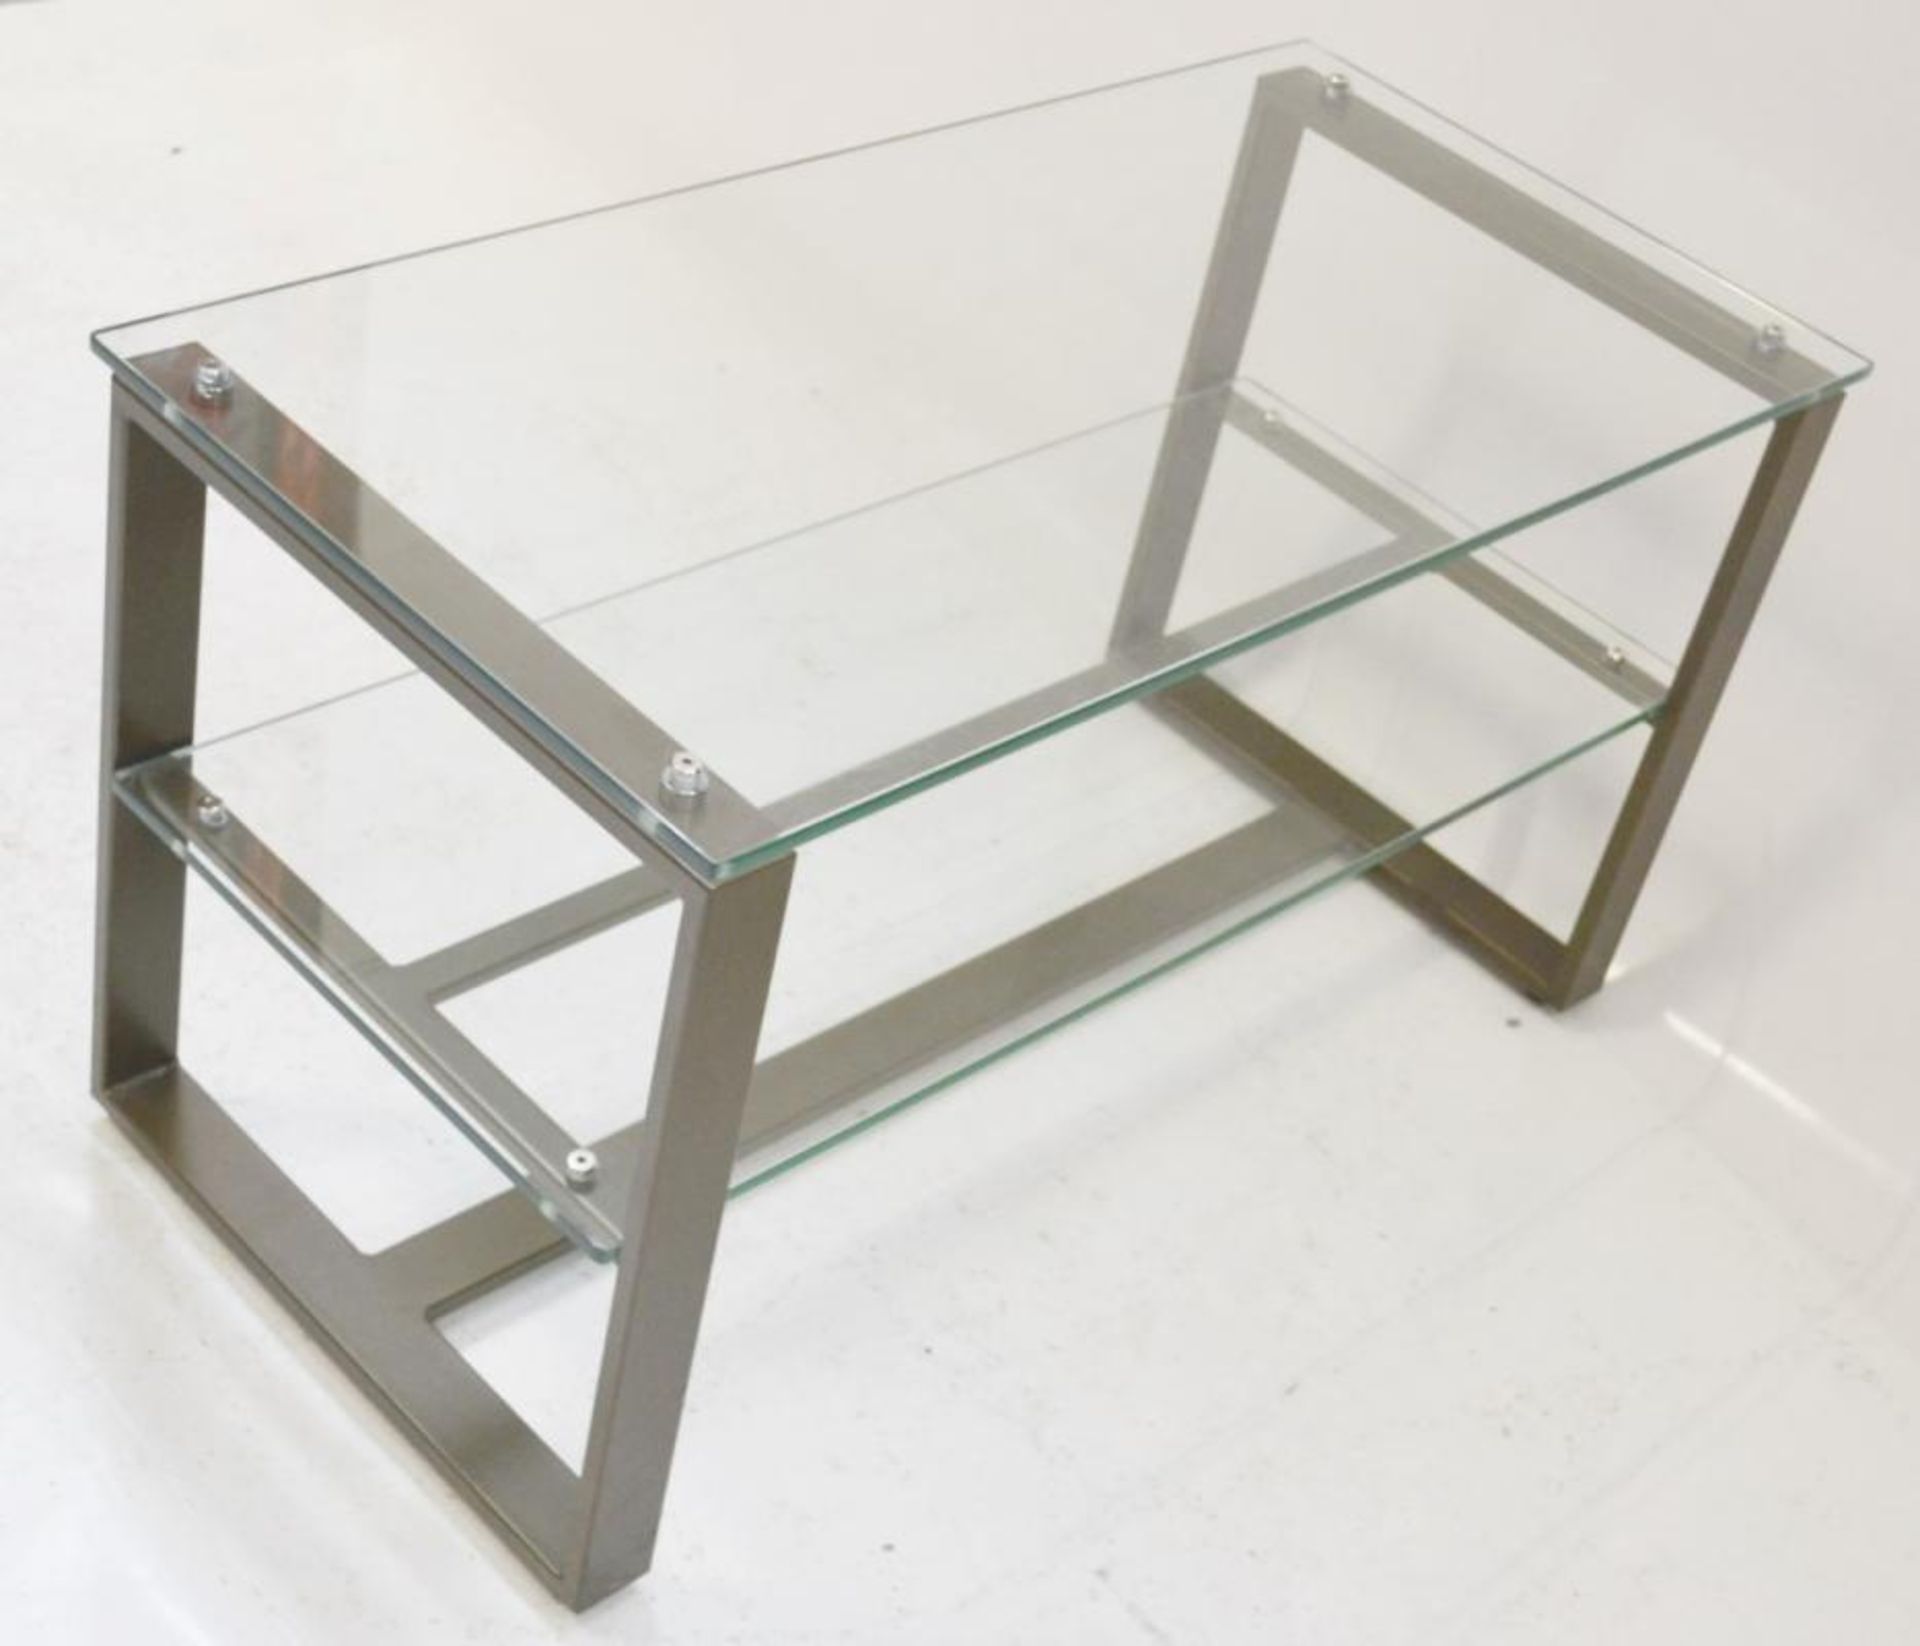 4 x 2-Shelf Glass Retail Display Units With Sturdy Metal Frames - Ex-Display, Recently Removed From